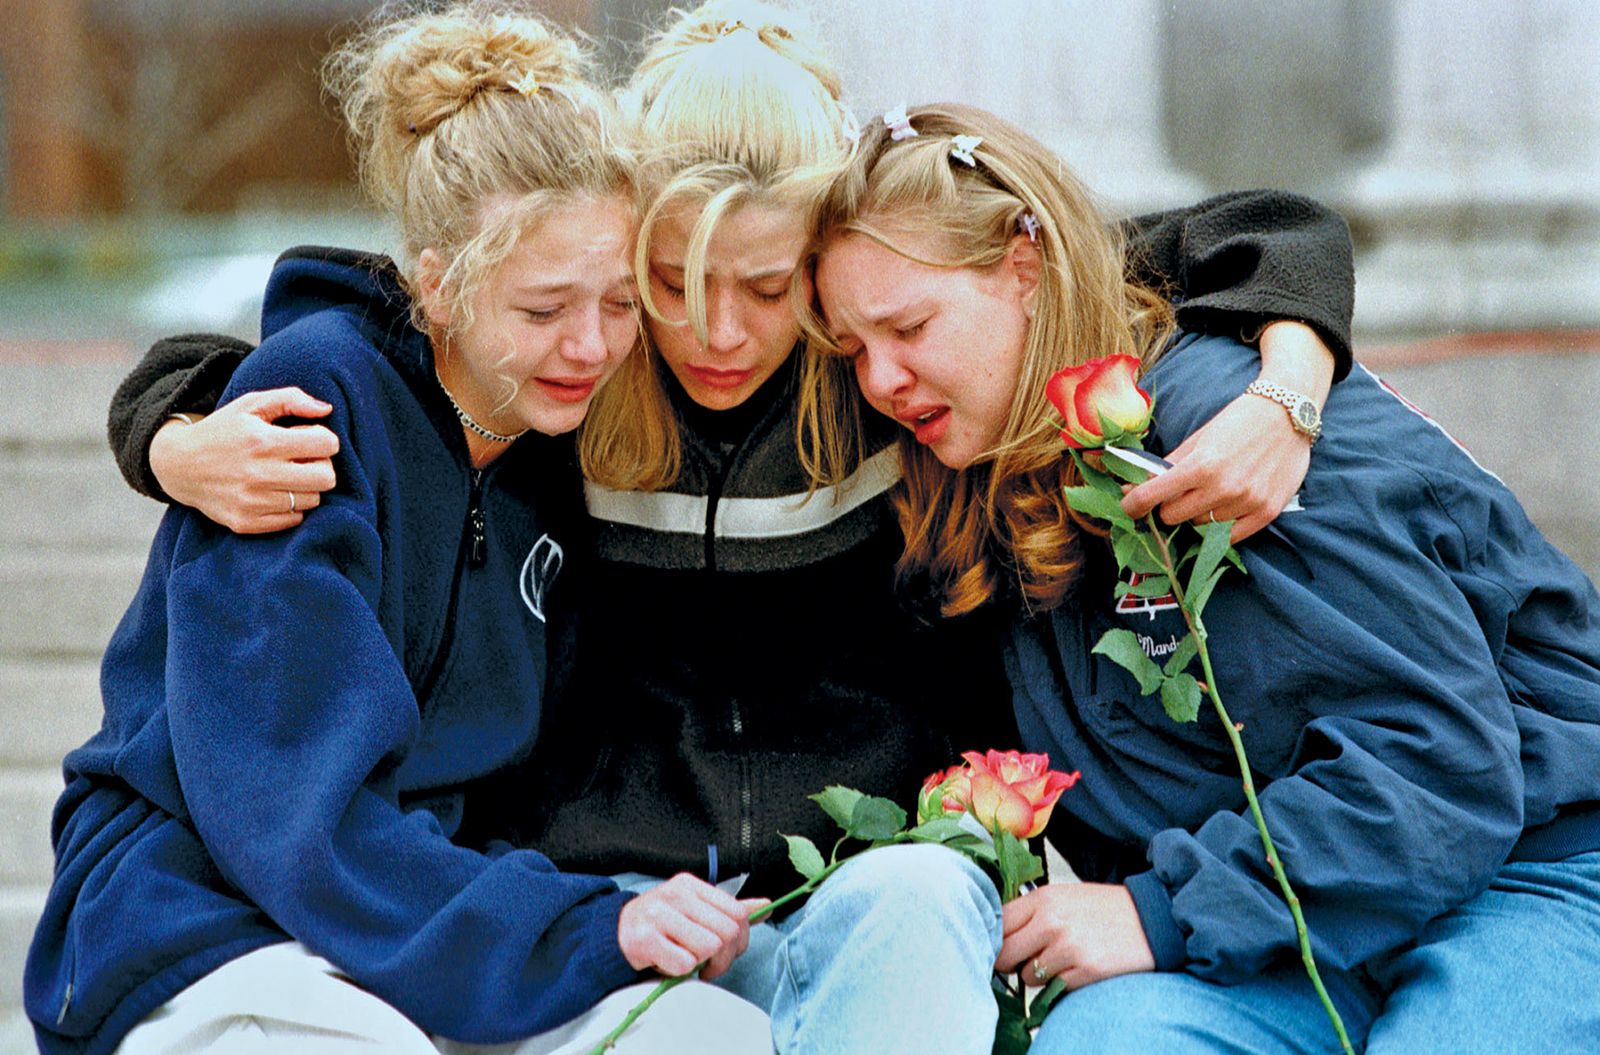 What Day Was The Columbine Shooting?